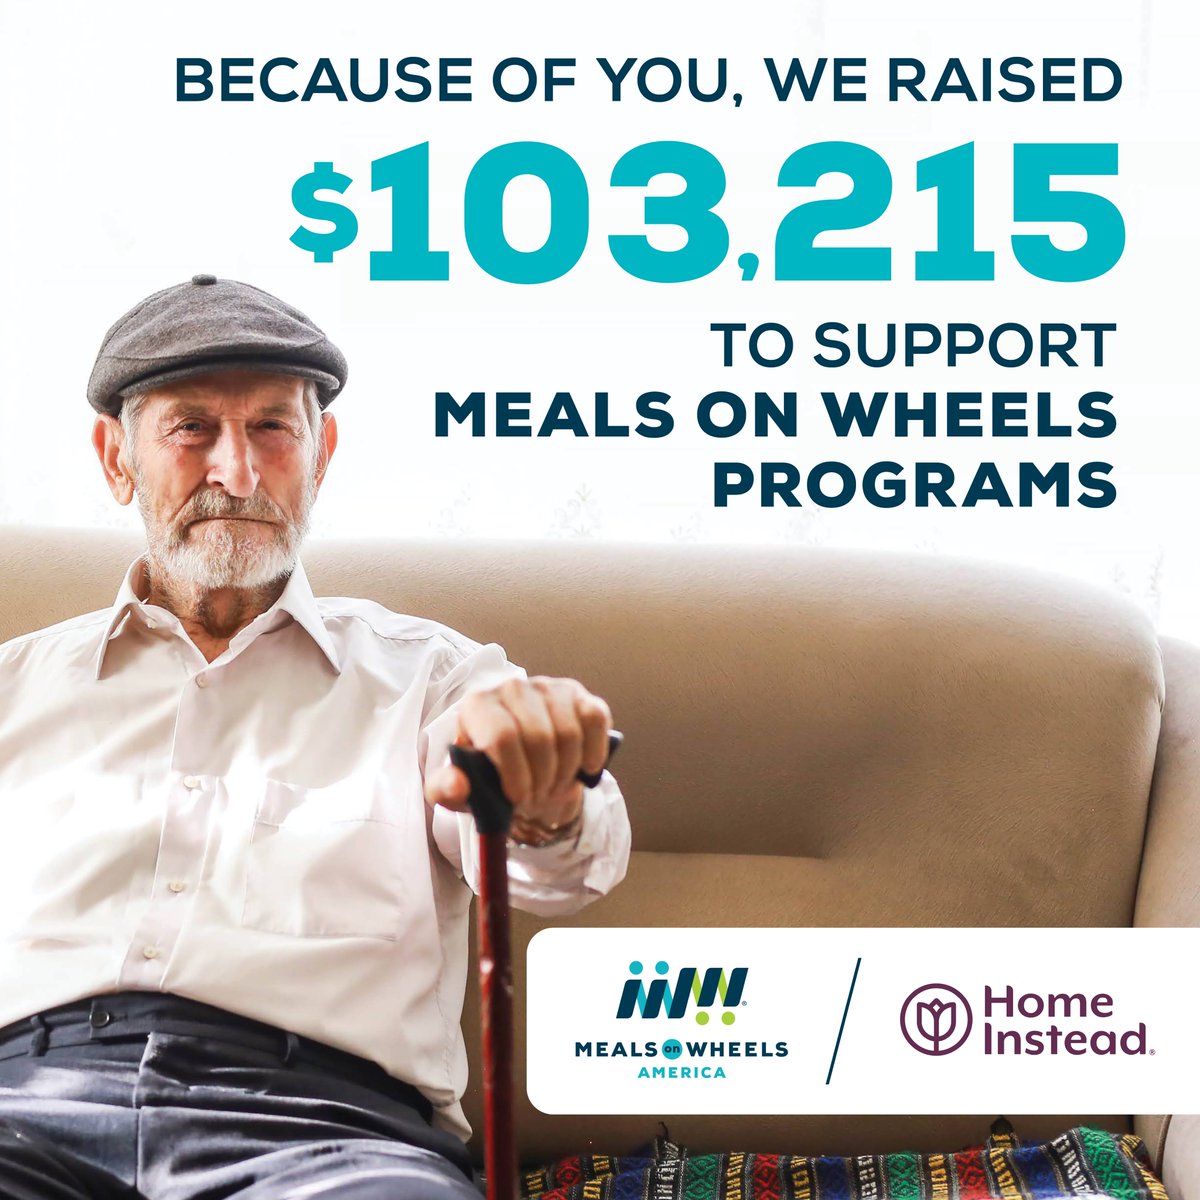 THANK YOU to everyone who donated to @_mealsonwheels last week while @homeinstead was matching donations.  I’m so proud to announce that together, we raised $103,215 which will make a profound impact in the lives of older adults. #powerofaknock #homeinsteadformow